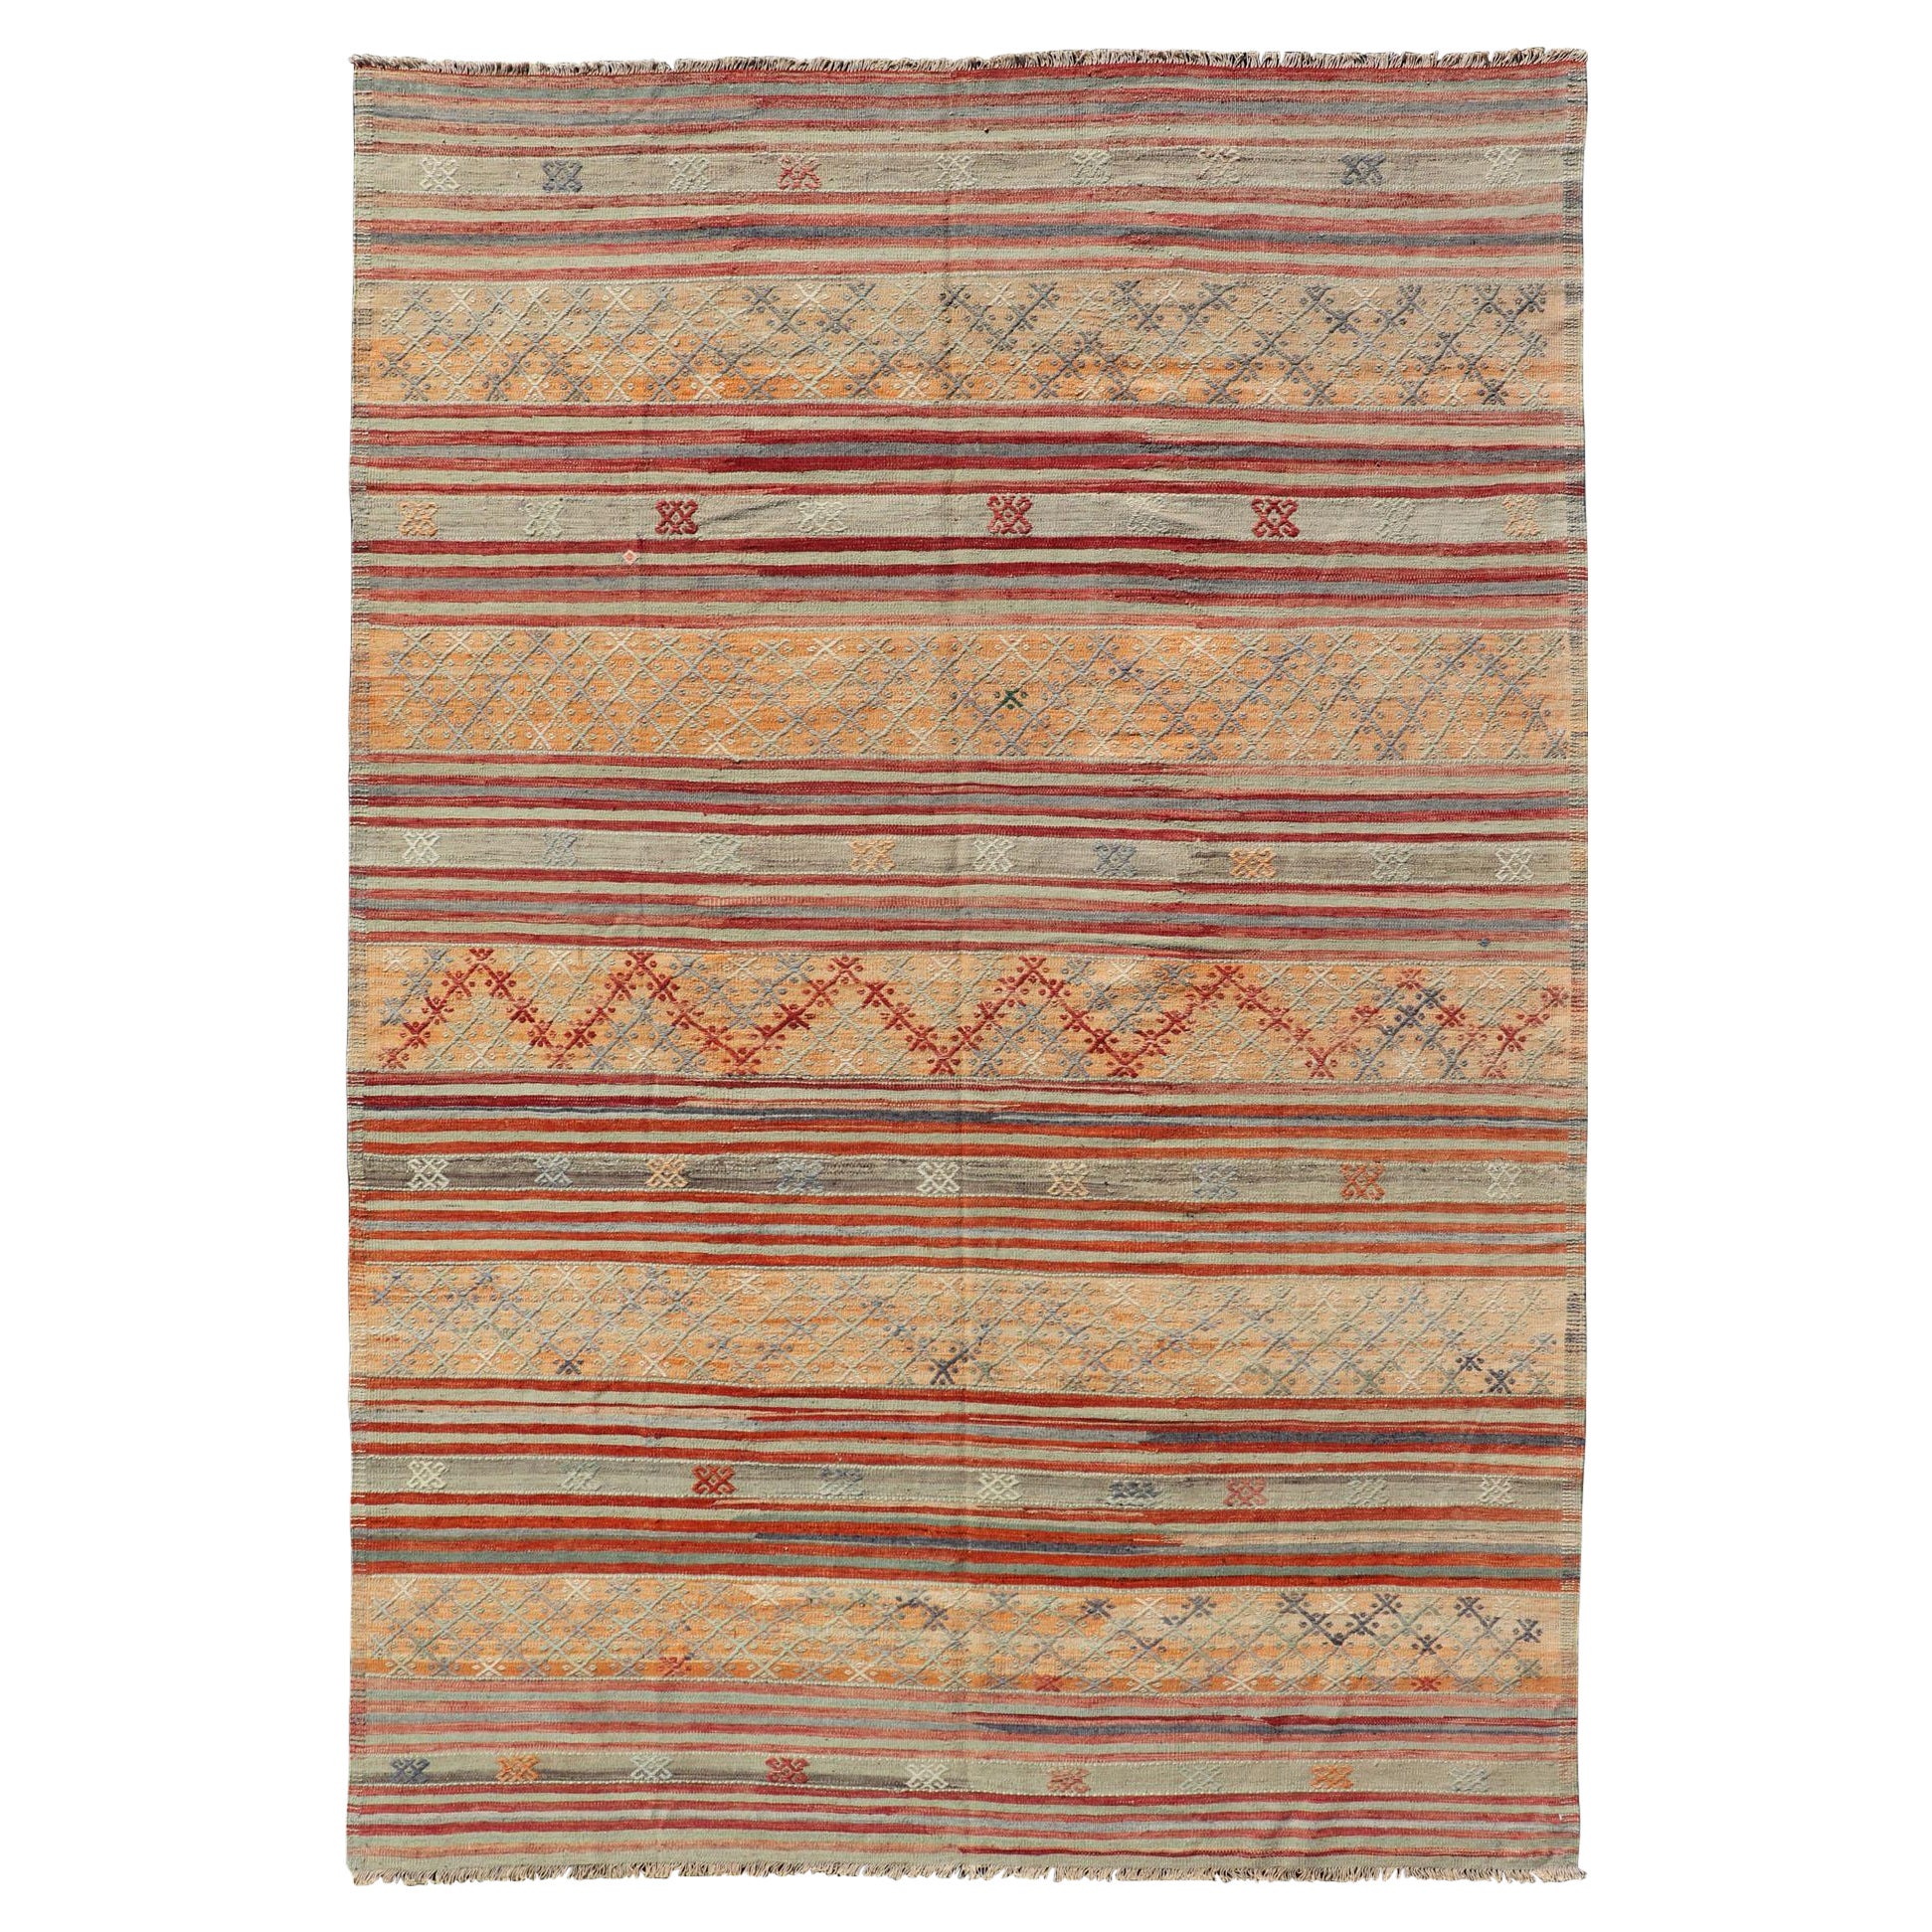 Colorful Vintage Turkish Embroidered Kilim with Stripes and Geometric Motifs 